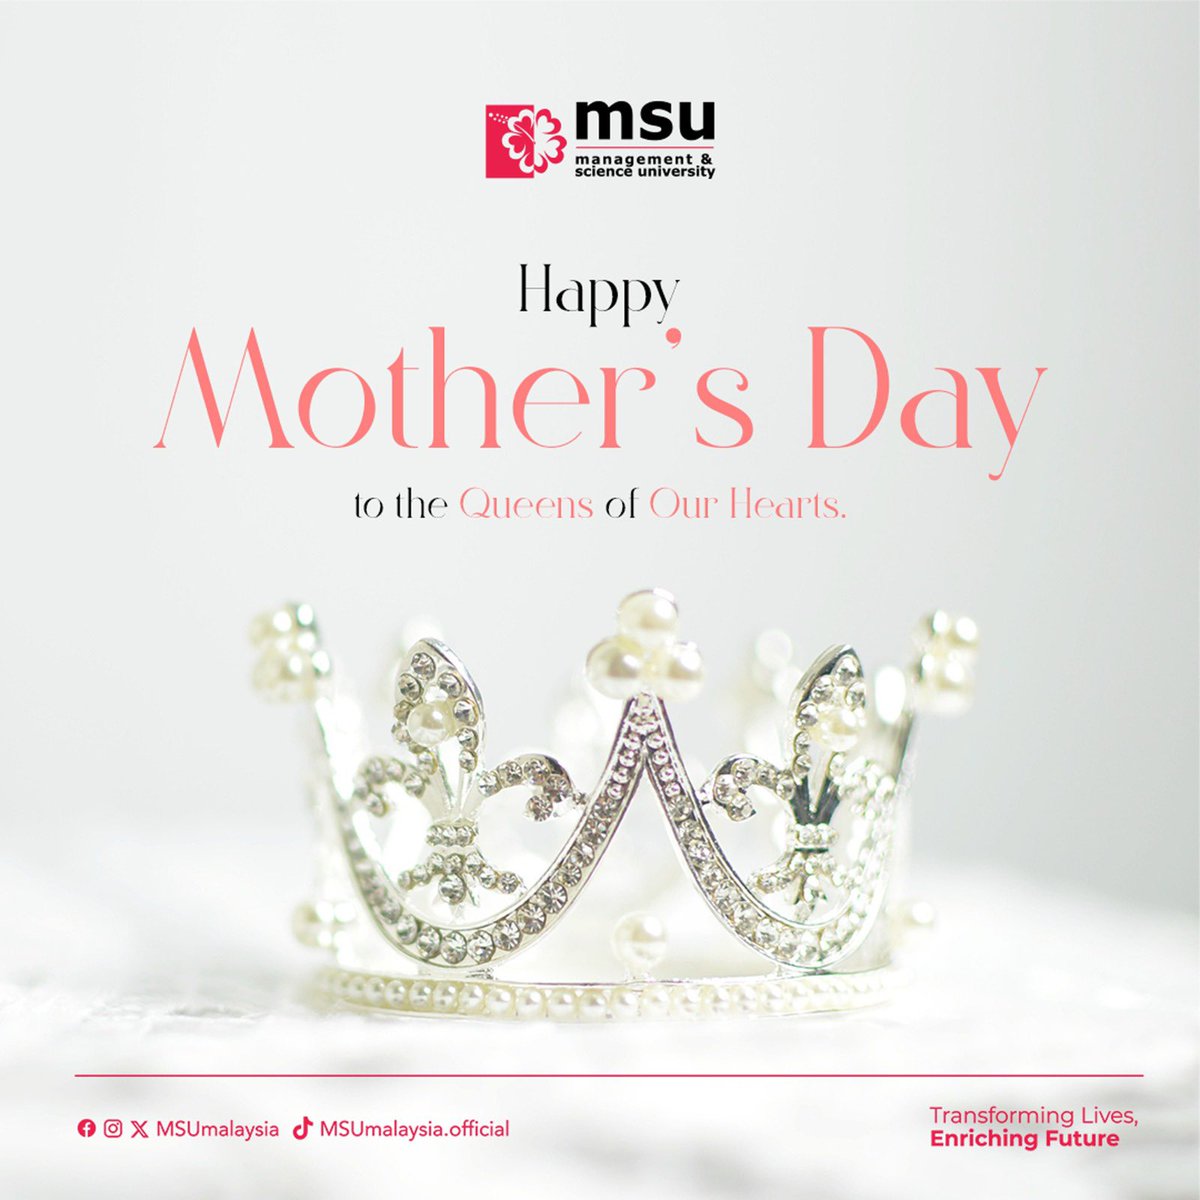 Happy Mother’s Day to all our mothers, who have consistently showered us with abundant love and care. #MSUmalaysia #Mommatters #MSUmothersday